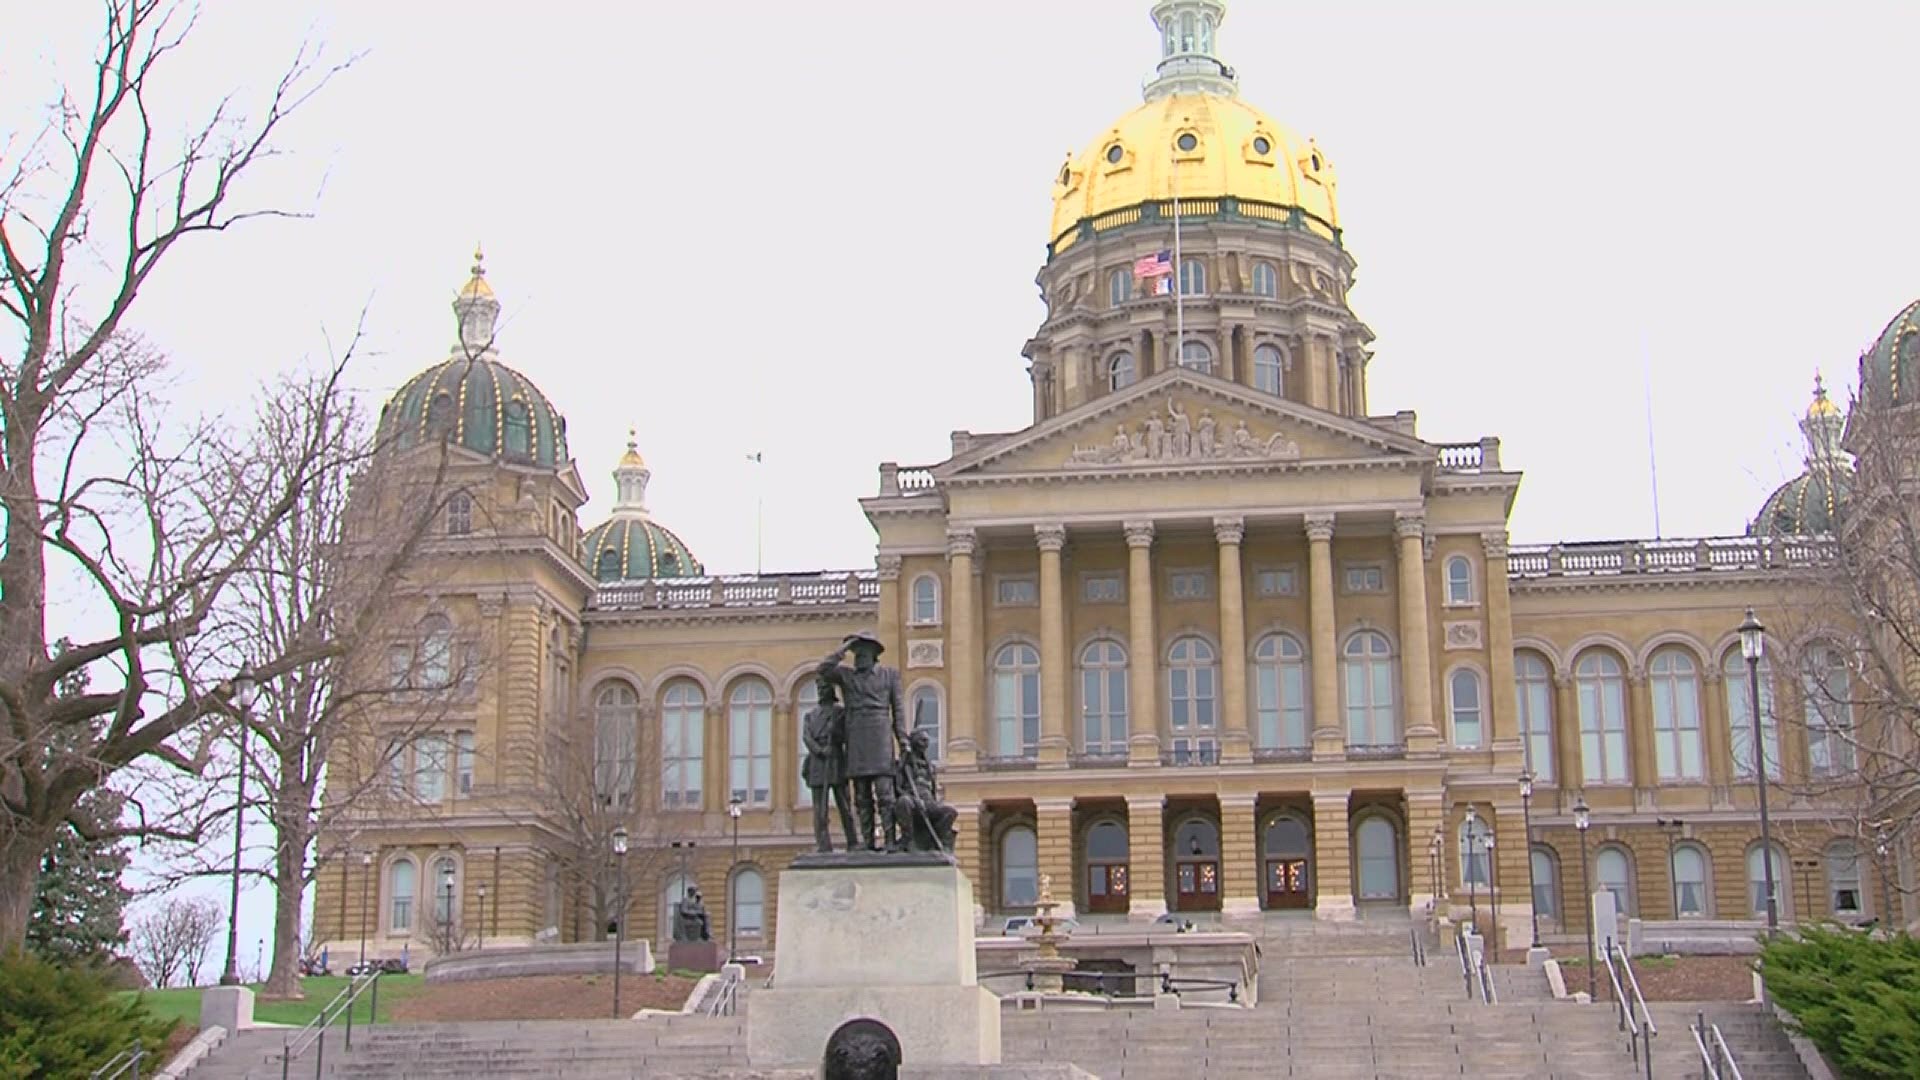 The Iowa Senate approved a proposed Constitutional amendment to restrict abortion rights in the state Tuesday.